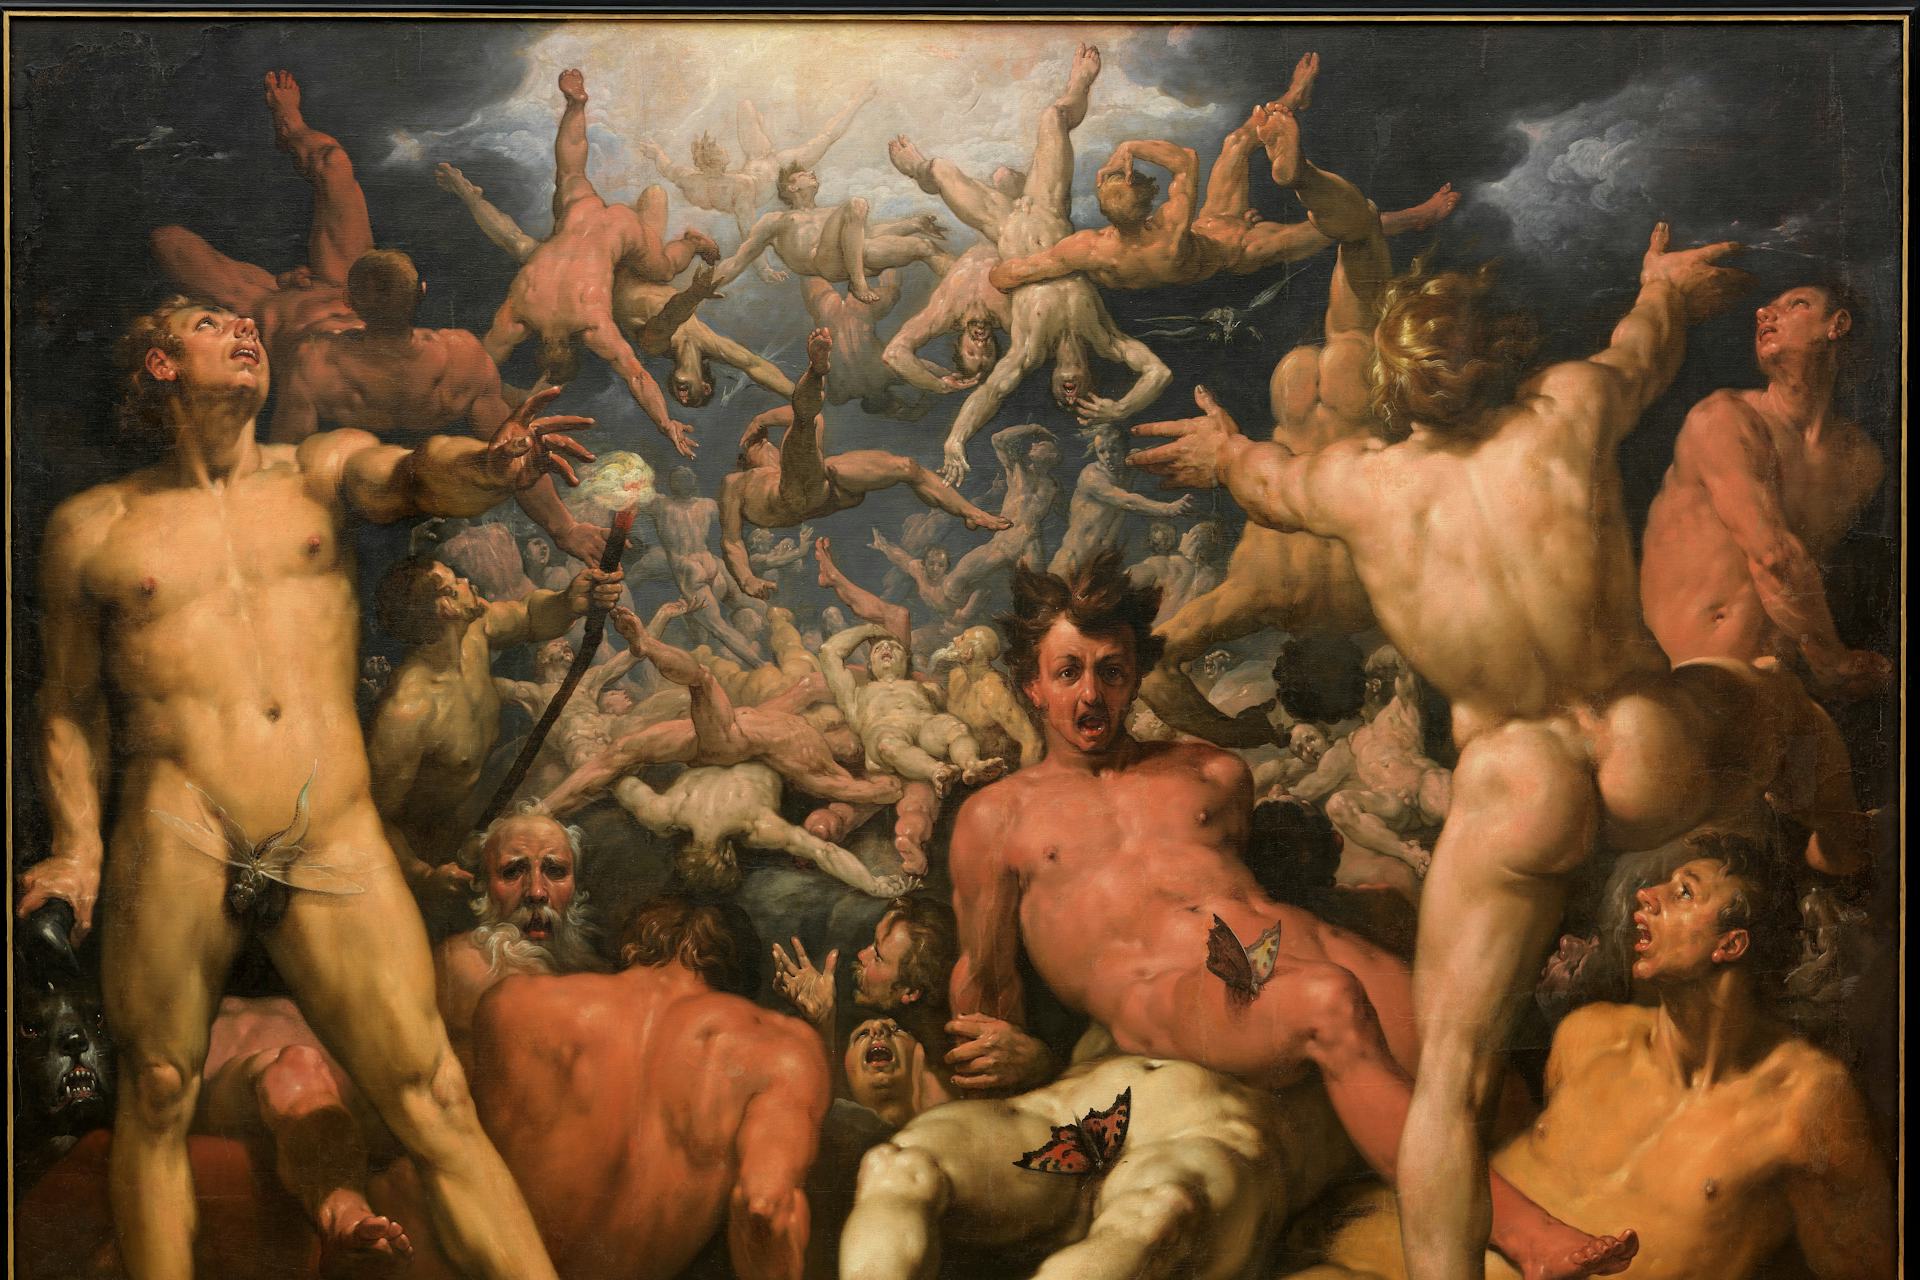 The Fall of the Titans by Cornelis van Haarlem